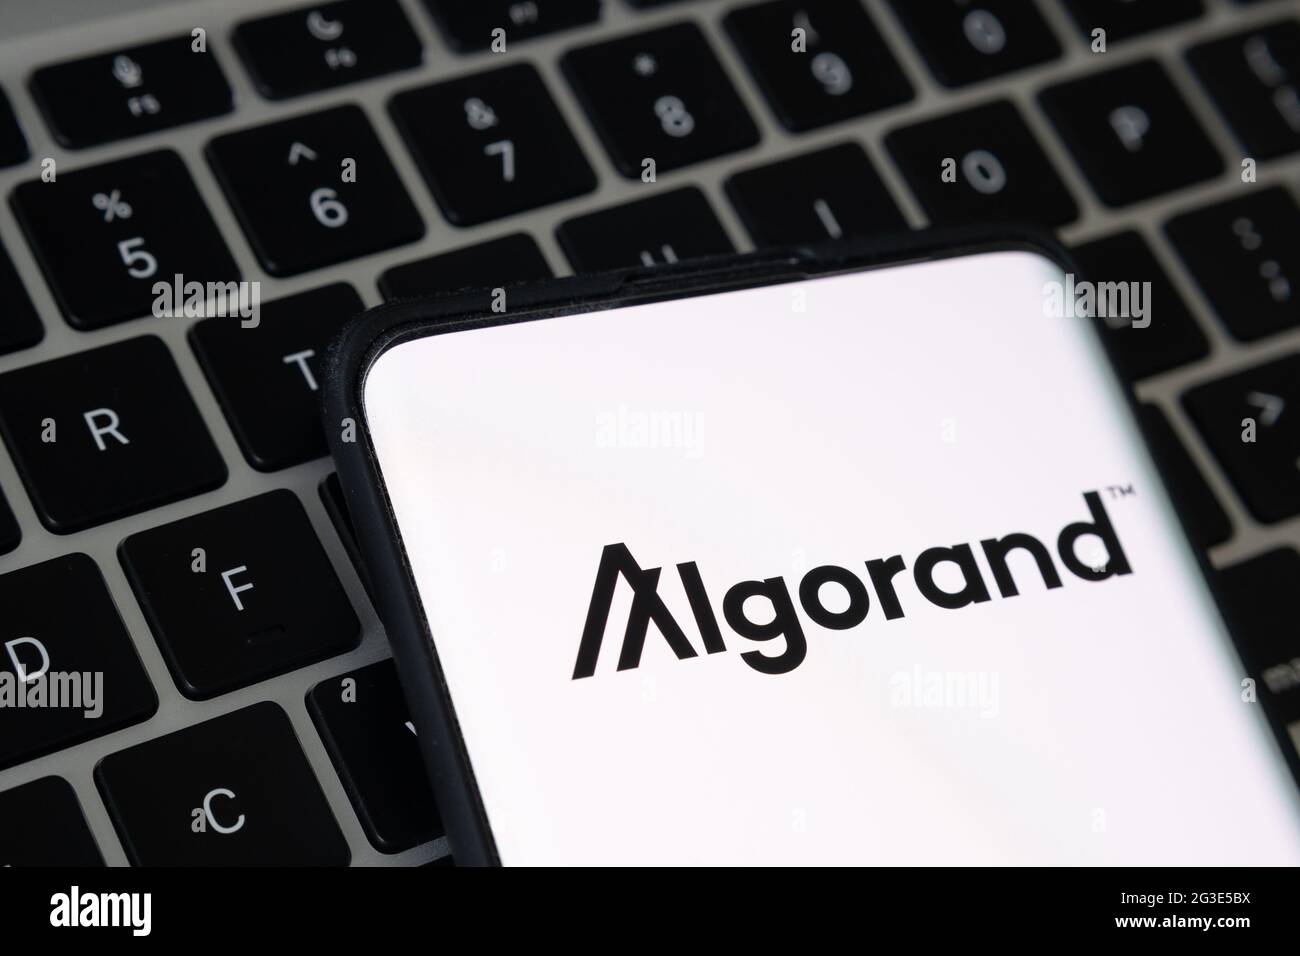 Algorand cryptocurrency platform logo seen on smartphone placed on keyboard of laptop. Concept. Stafford, United Kingdom, June 16, 2021. Stock Photo